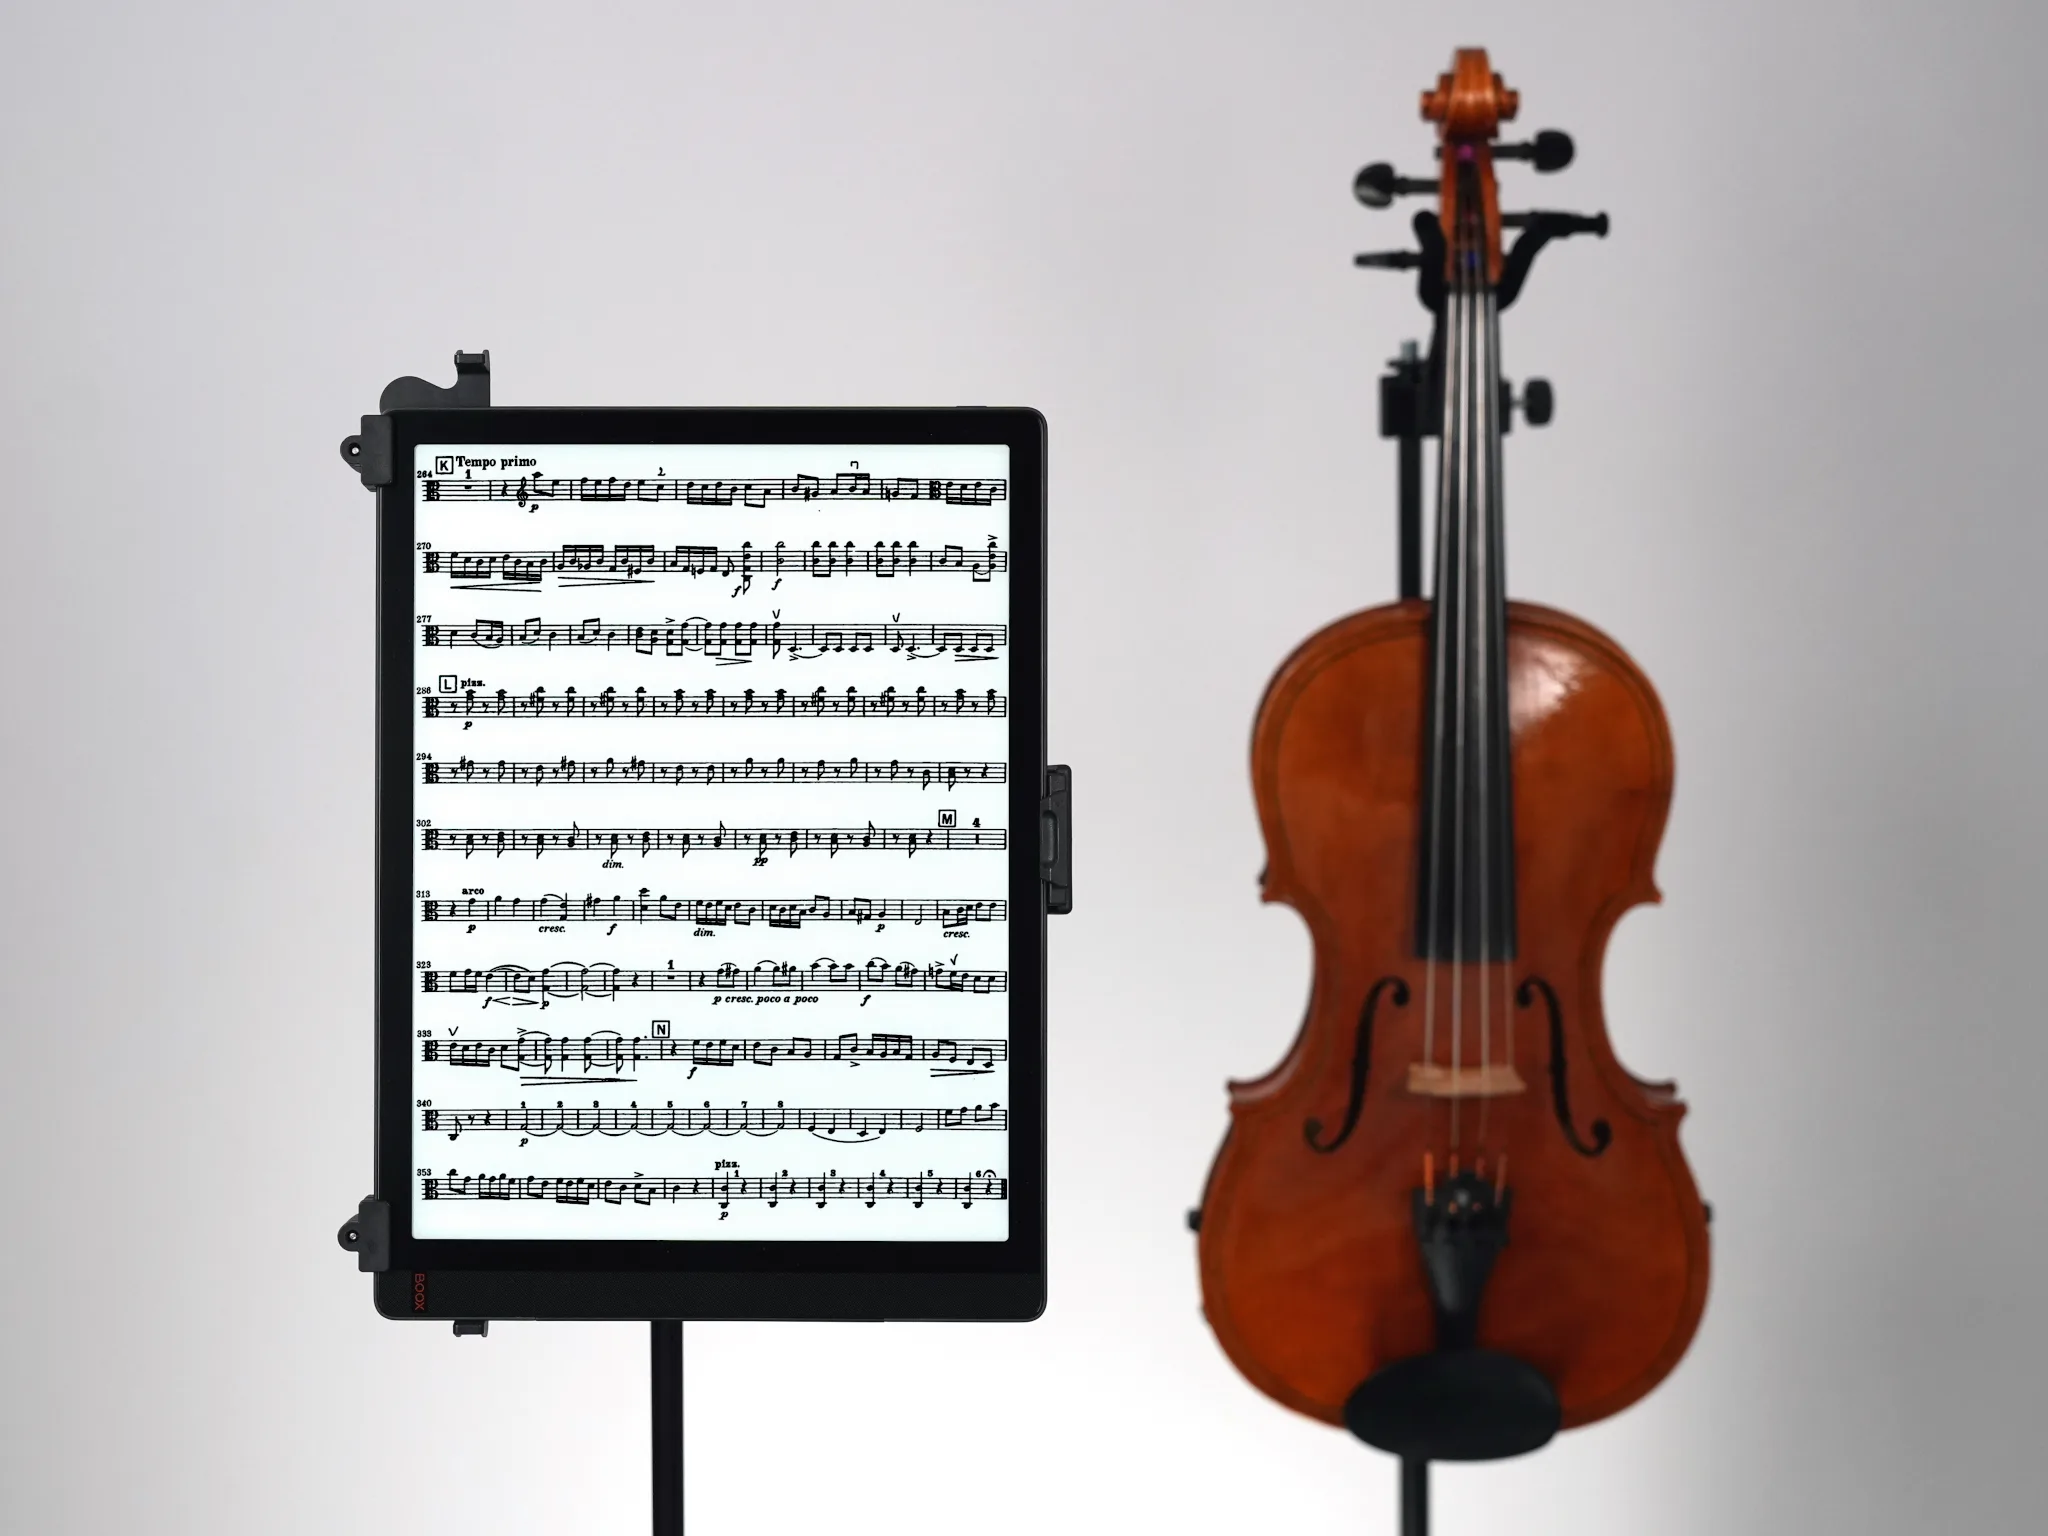 Onyx Boox Tab X – The best large E-Book-Reader (E-Reader) with a 13,3-inch display – Displaying sheet music, with a viola in the background